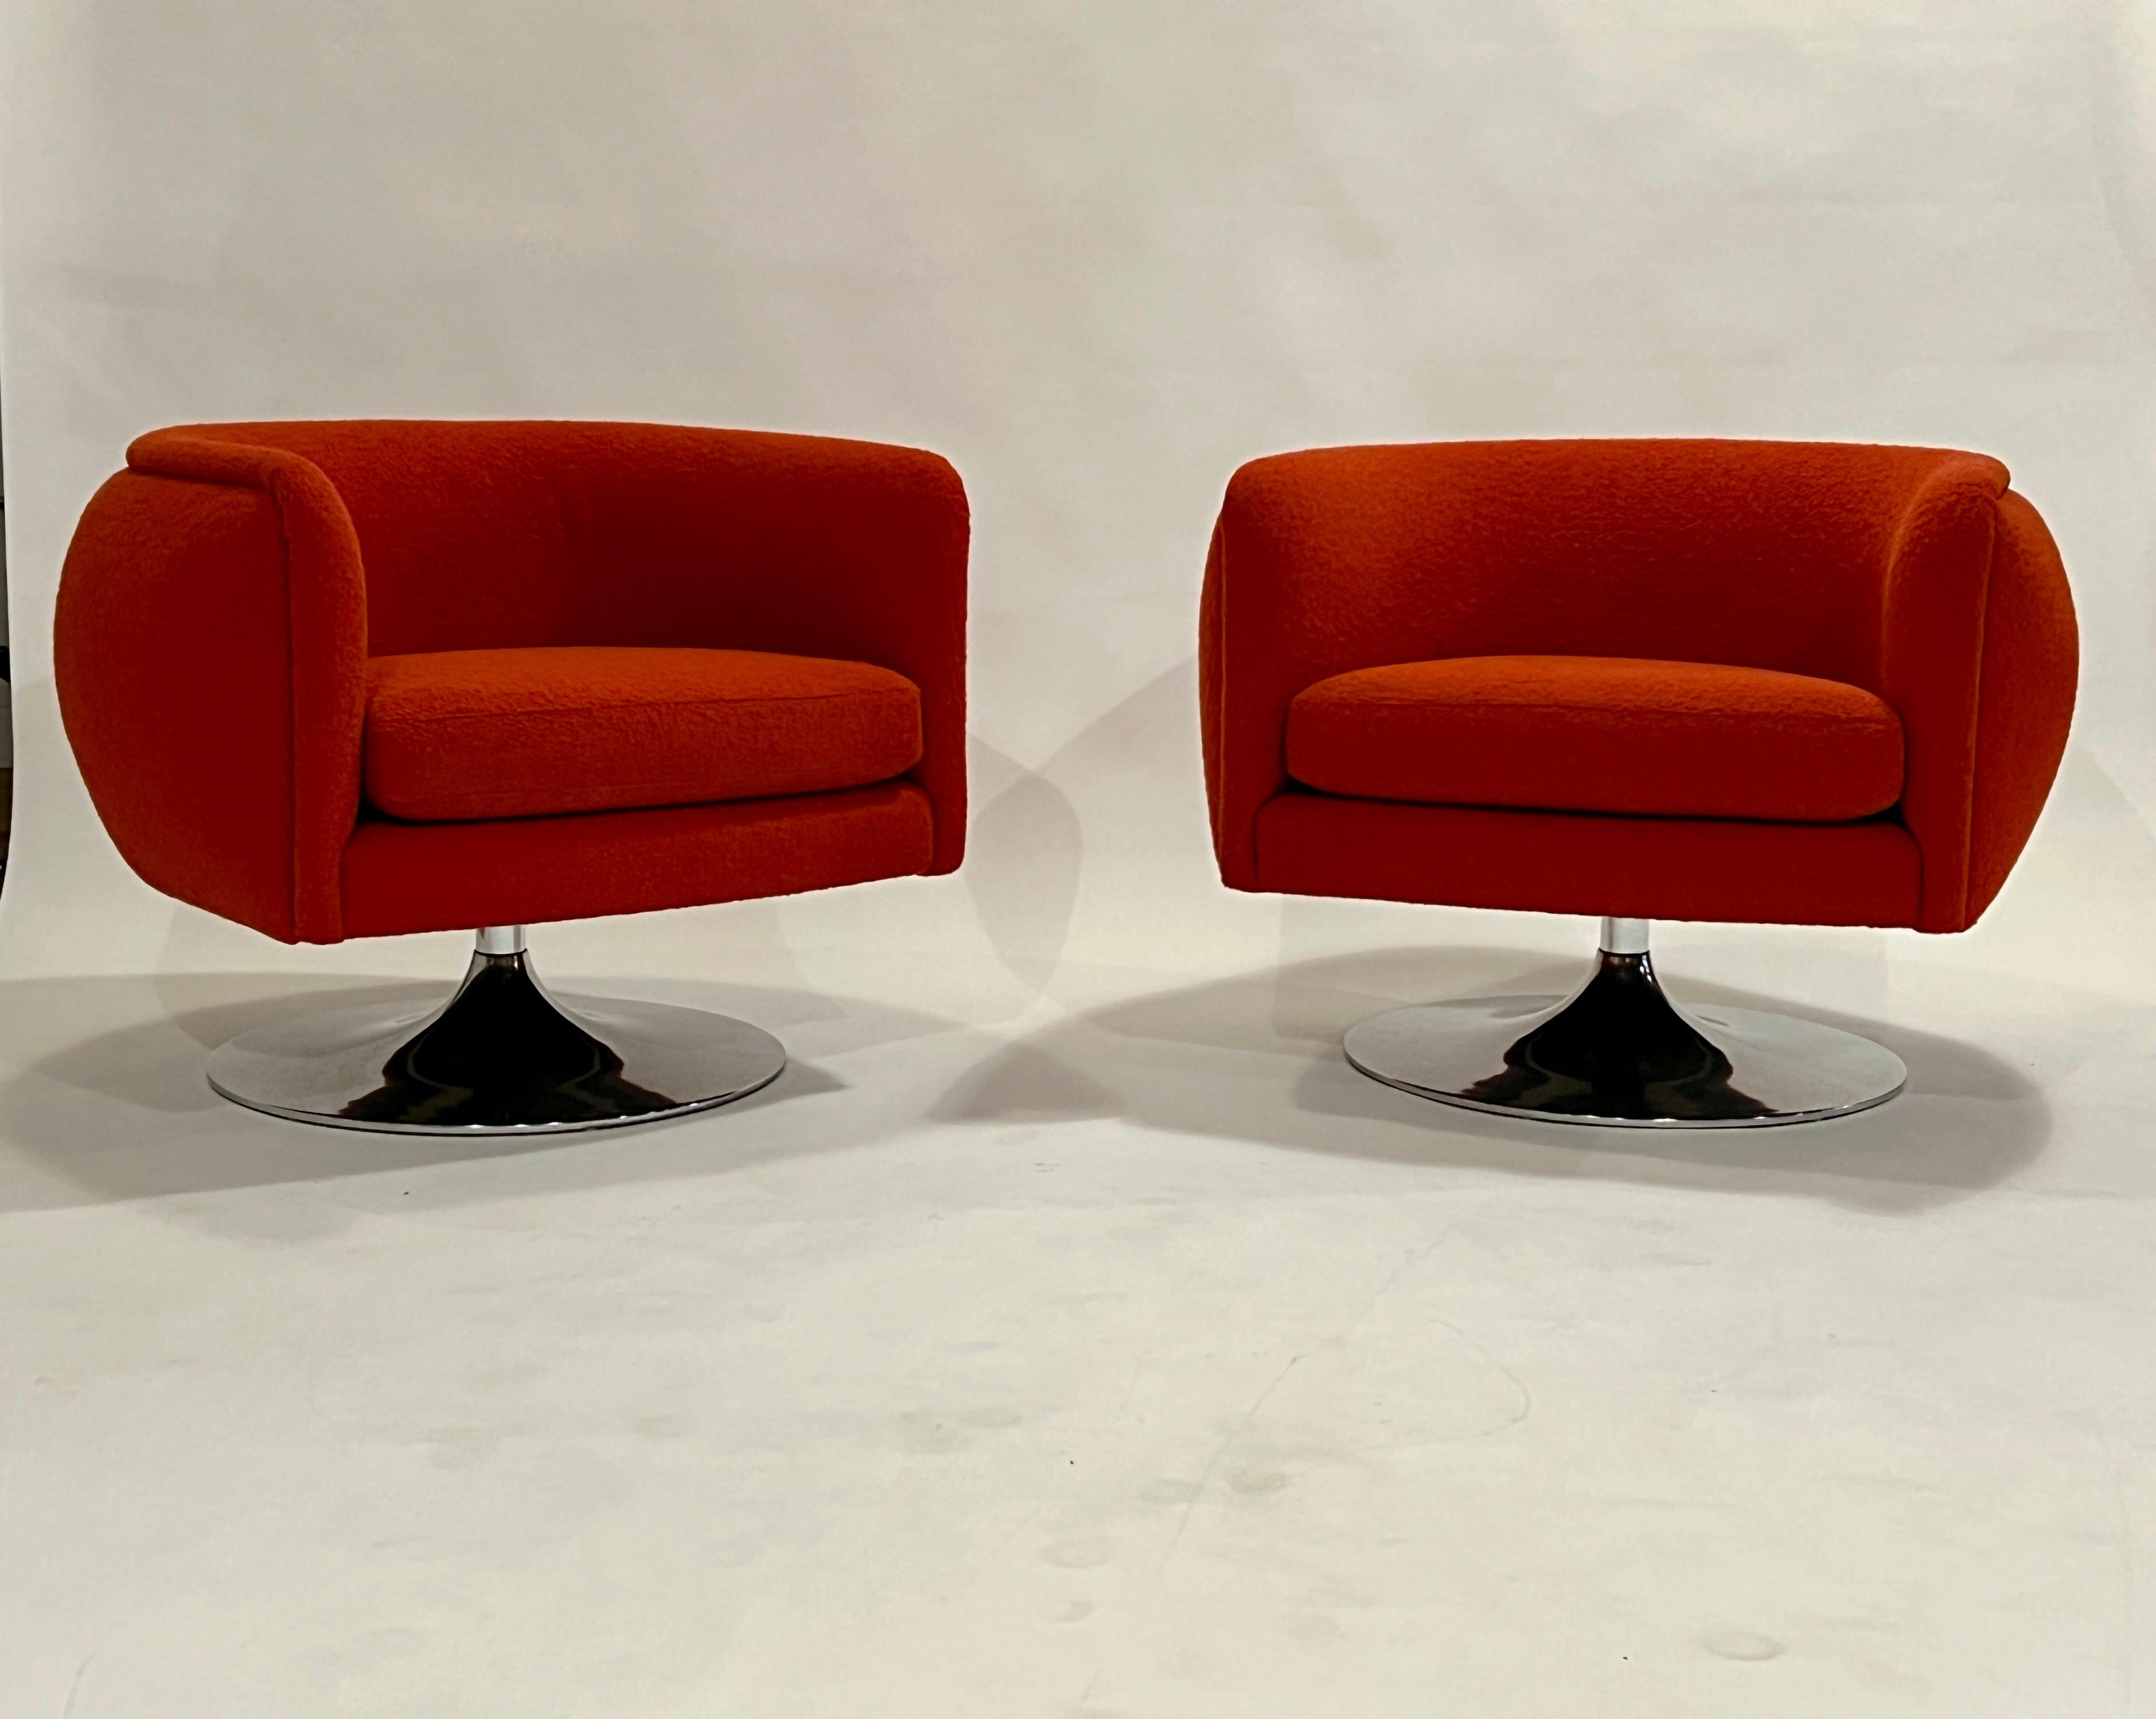 Pair of Joseph D'urso Swivel Lounge Chairs from Knoll In Good Condition For Sale In Chicago, IL